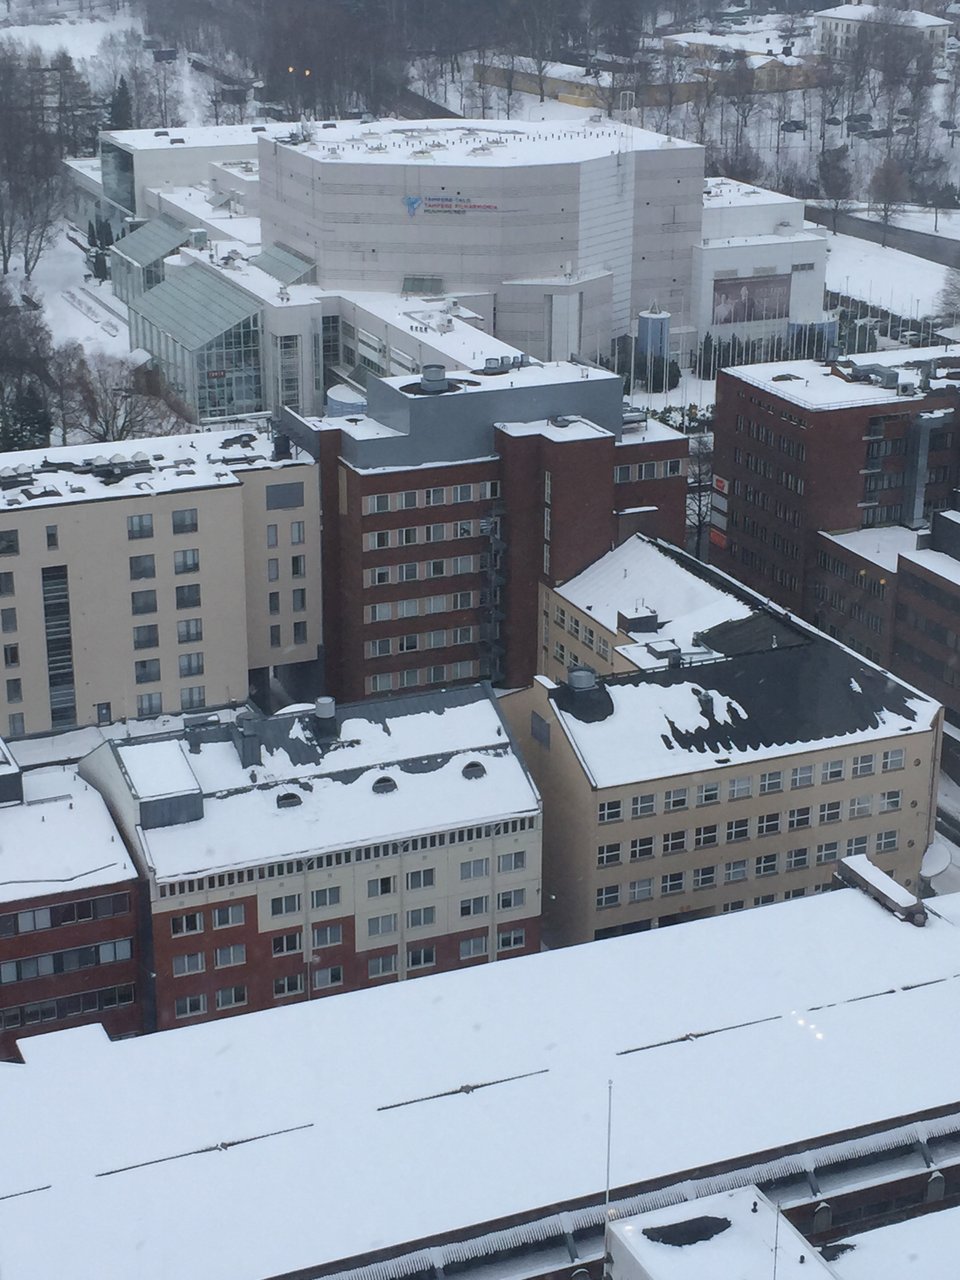 01 Tampere-talo from above.jpg